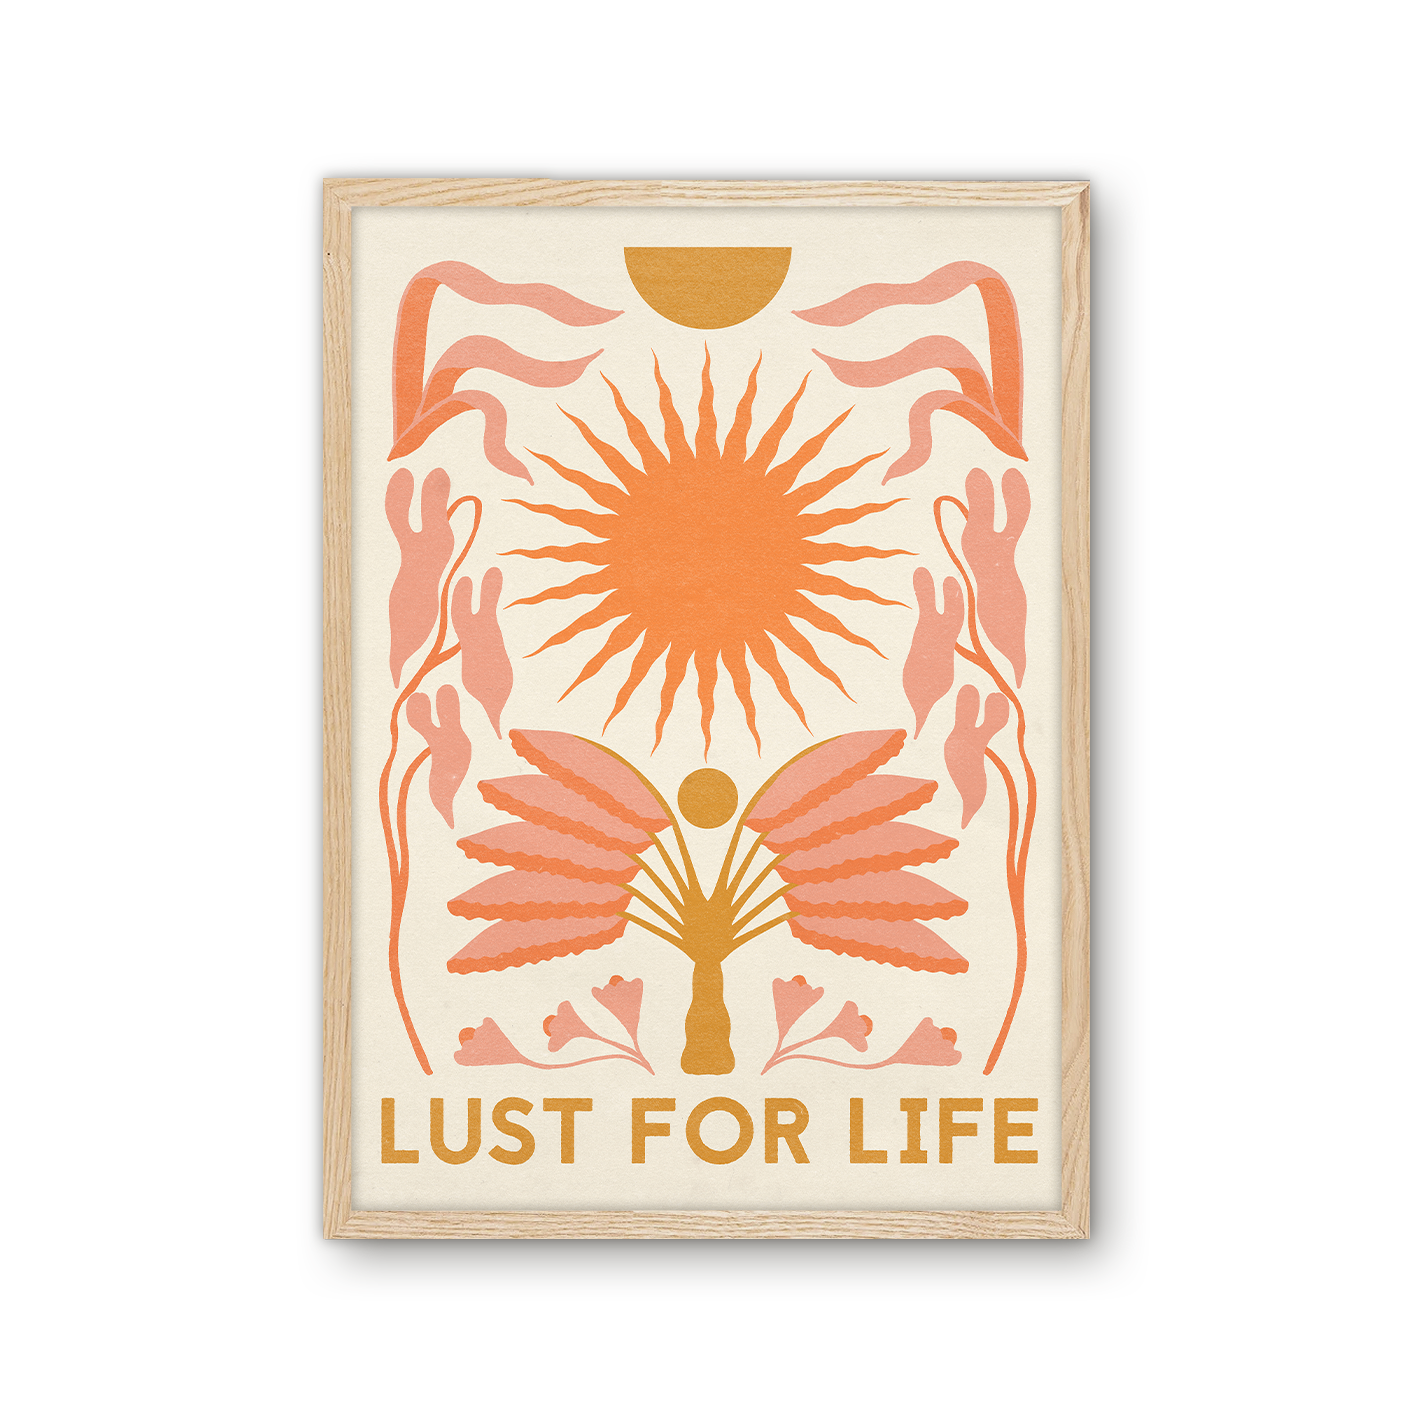 Lust for Life Print